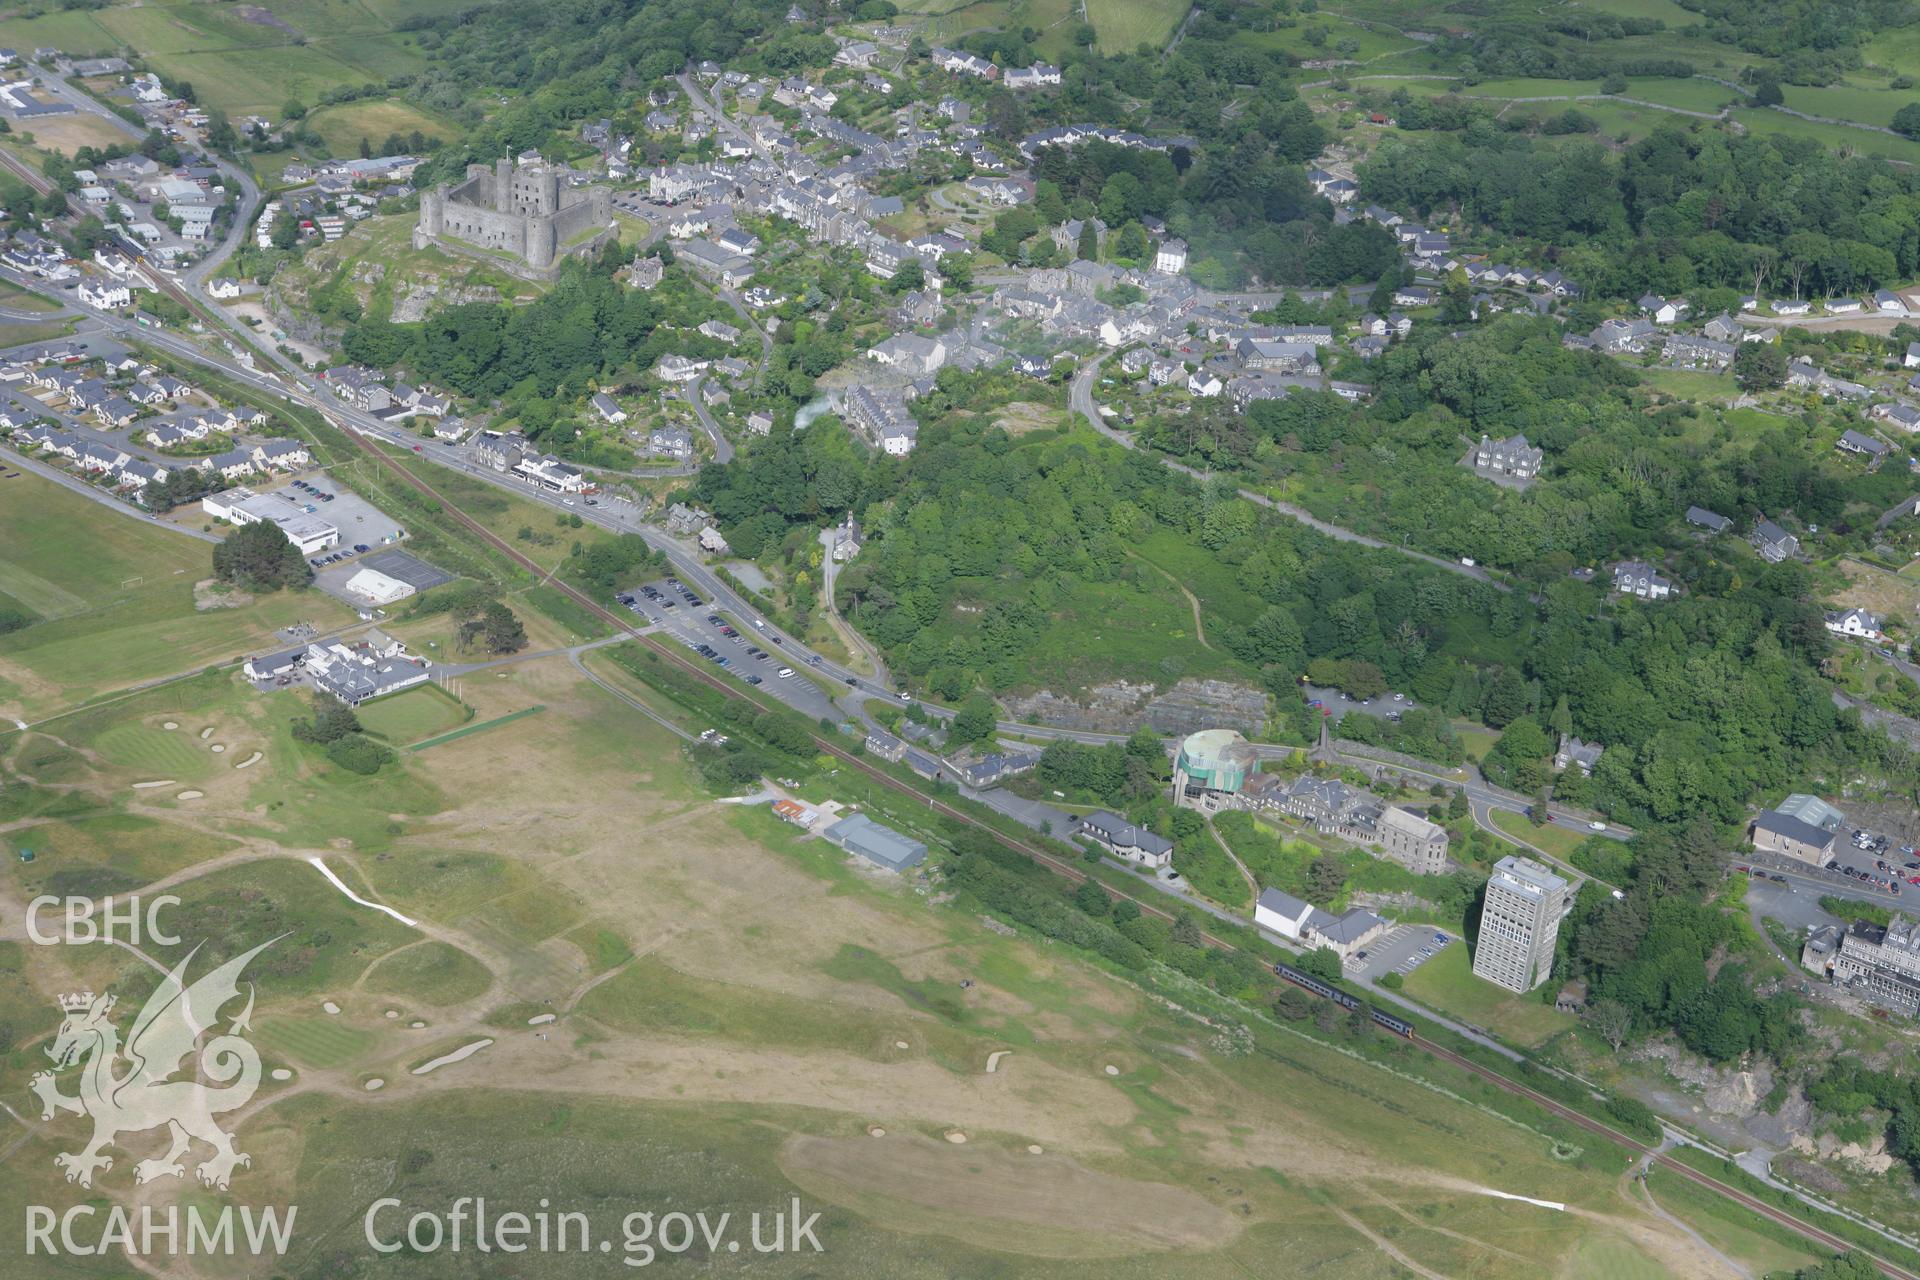 RCAHMW colour oblique photograph of Harlech Castle and town. Taken by Toby Driver on 13/06/2008.